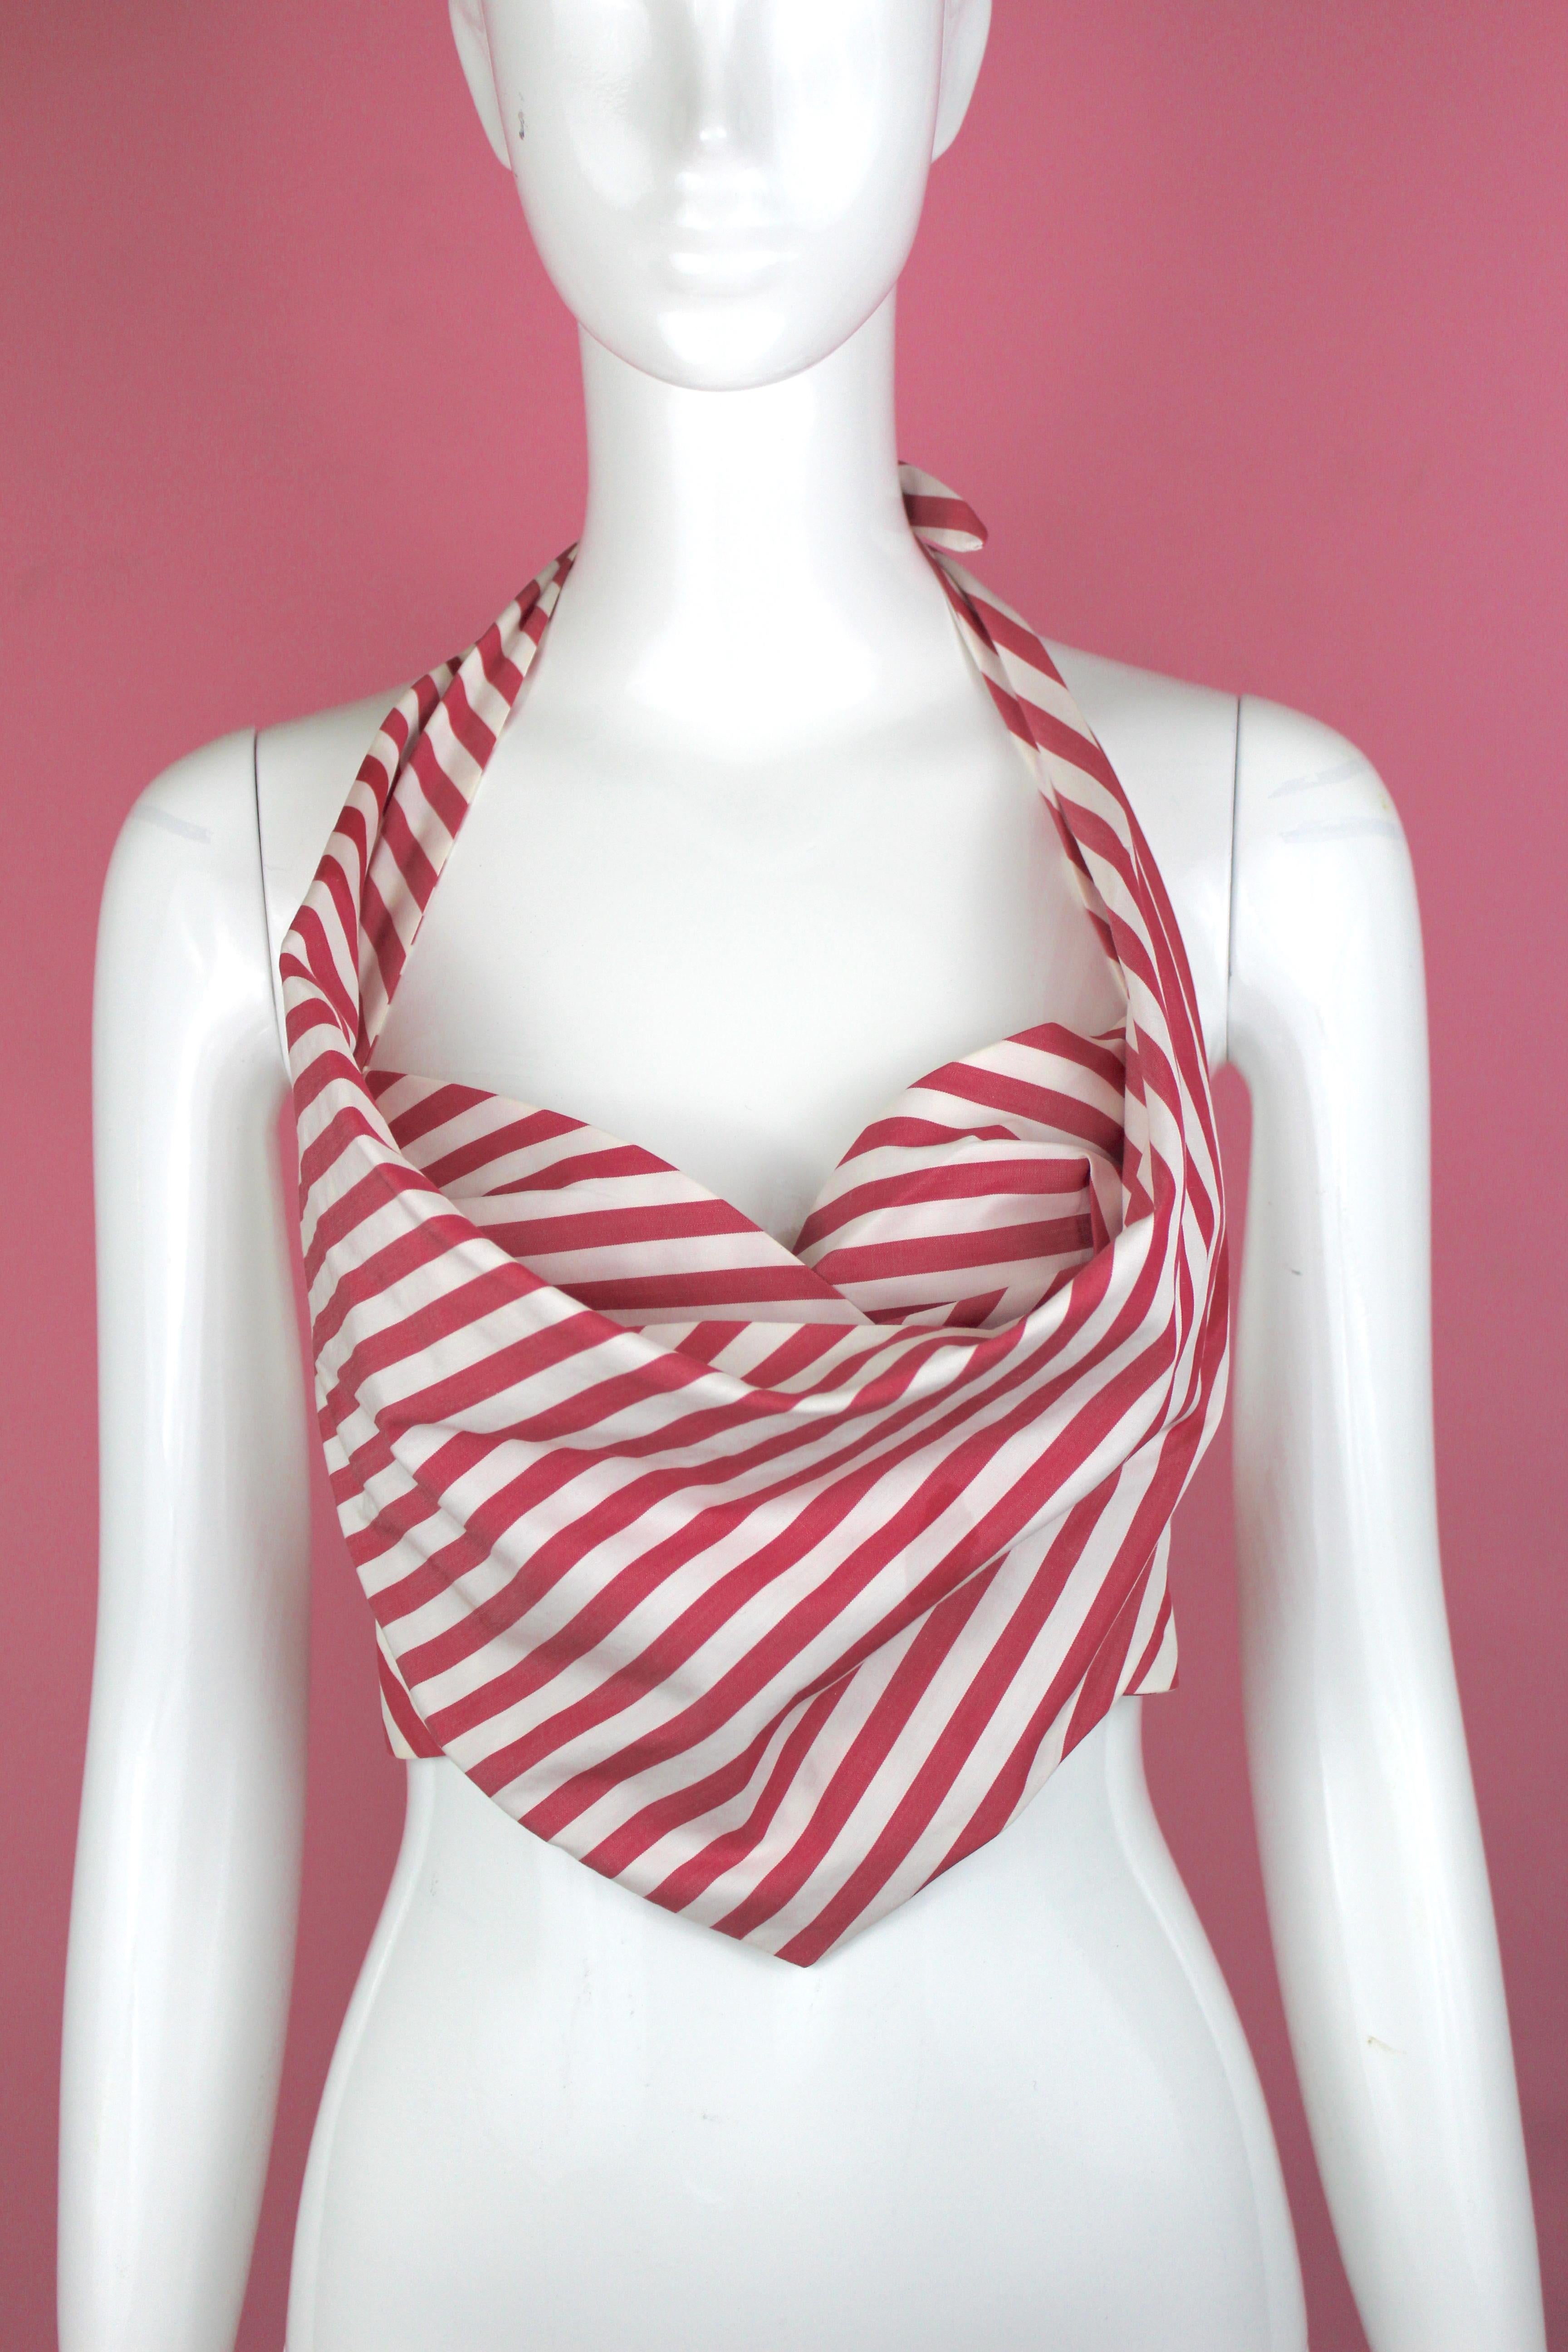 -Beautiful halter top from Vivienne Westwood
-In candy stripe pattern, ties on the neck, and fastens on the back
-Made in Italy 
-Sized 6 US on tag but best fitting size 4 US
-Care label has been cut off but 100% authentic 

Approximate Measurements